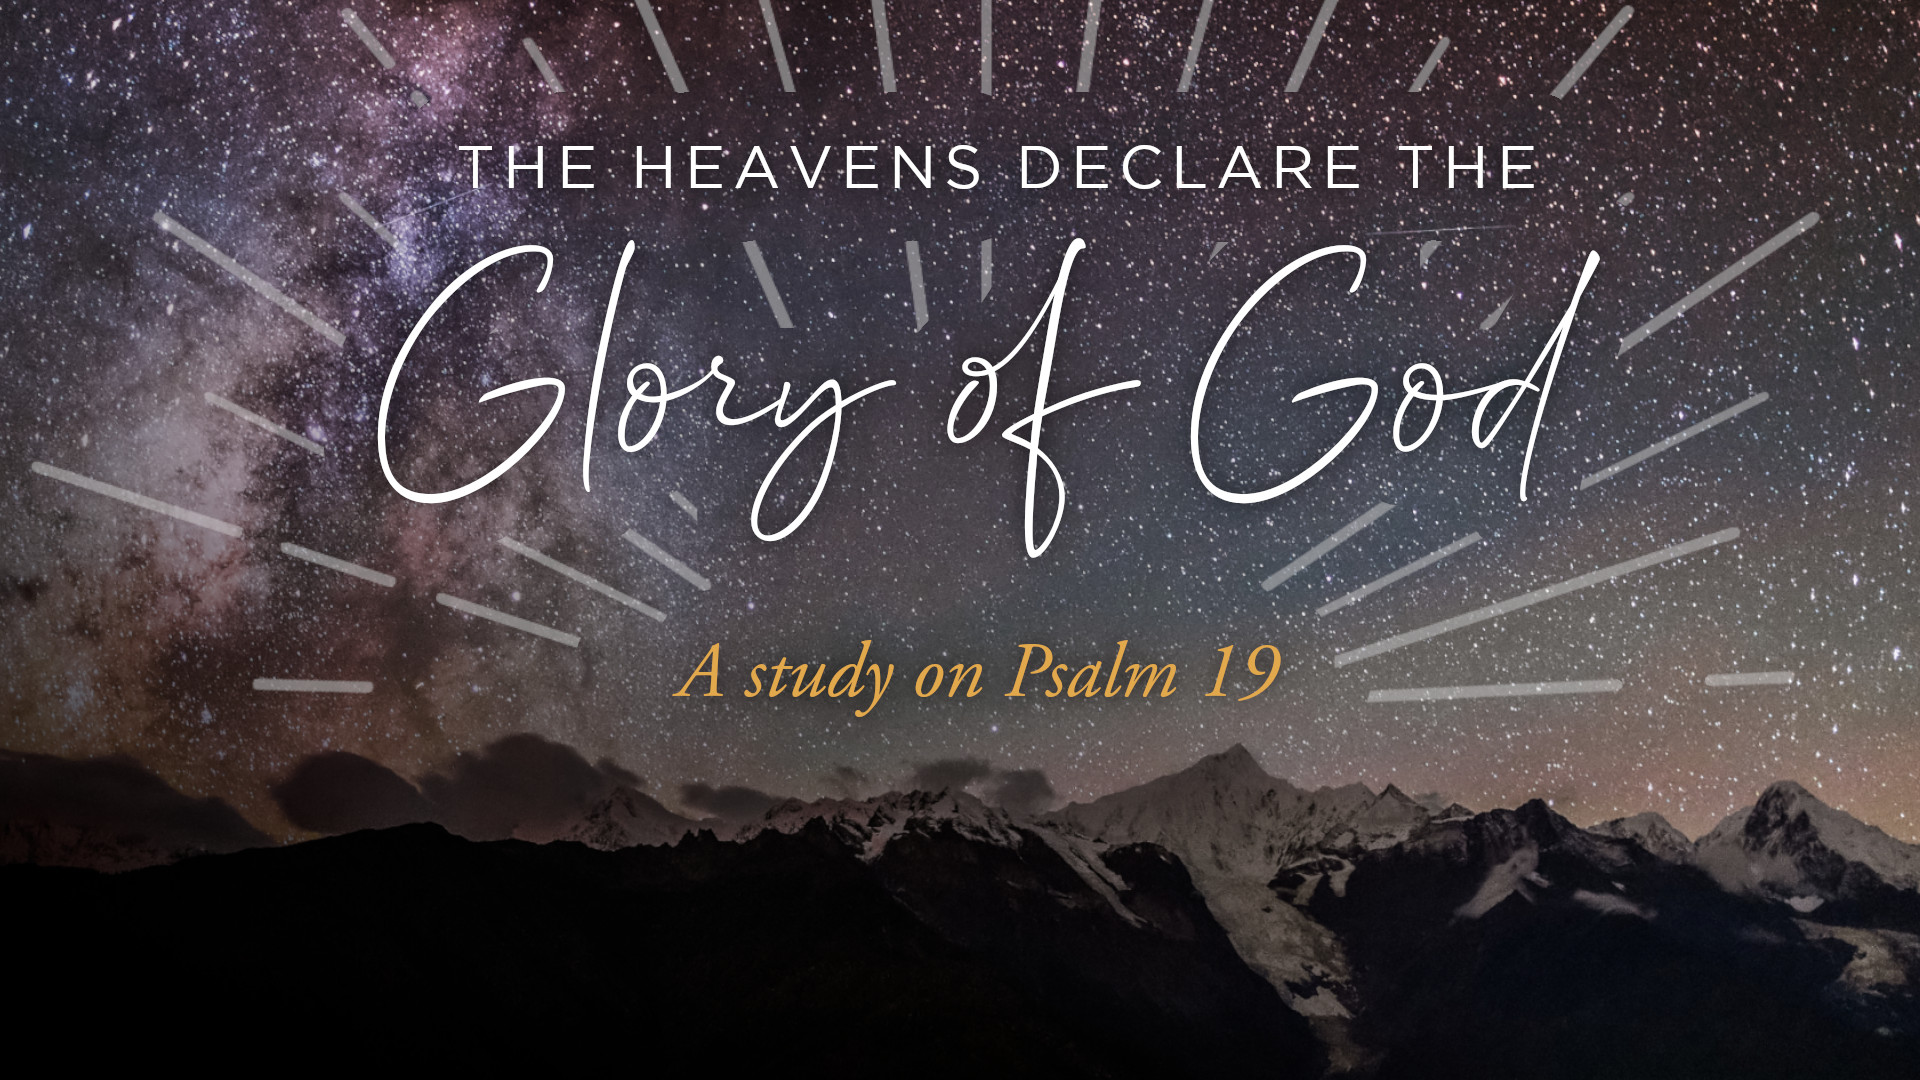 The heavens declare the glory of God Psalm 19 1080p 